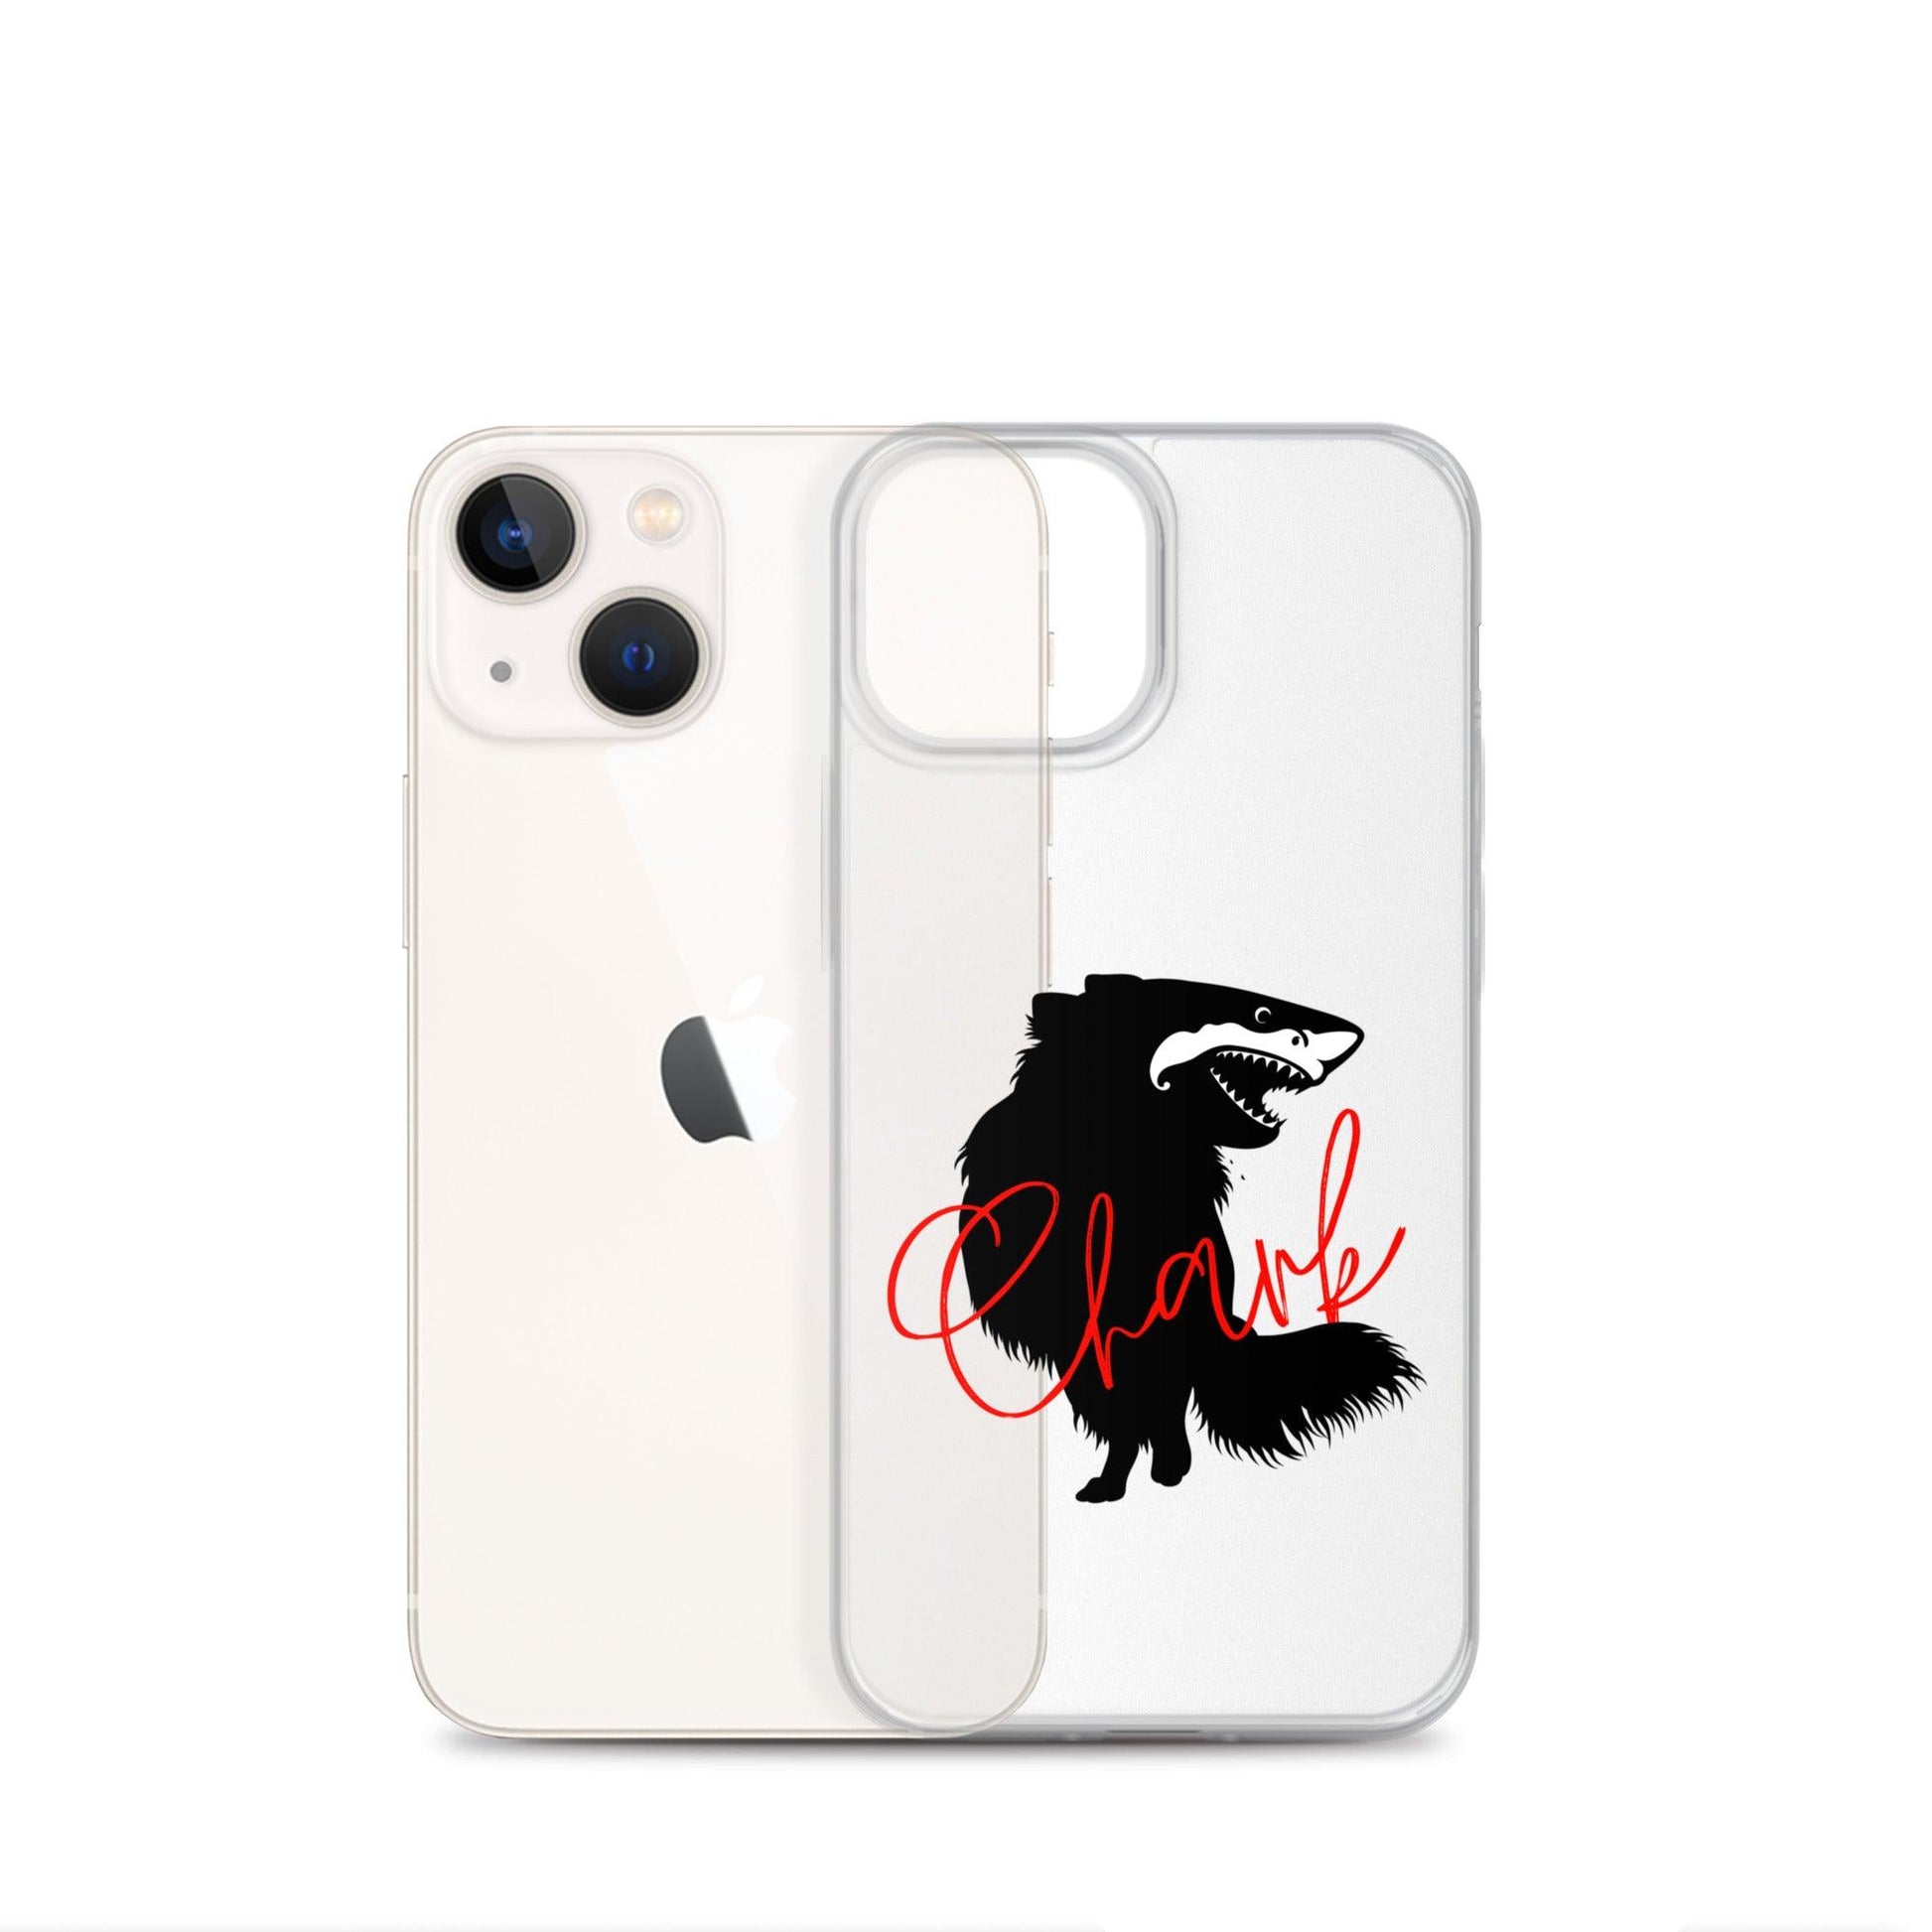 Chihuahua + Shark = Chark Clear iPhone case with the black silhouette of a longhaired chihuahua with the face of a great white shark - mouth open to show off jaws lined with lots of sharp white teeth. The word "Chark" is artfully placed in red cursive font over the image. For trendy chi lovers. iPhone 13 mini case.